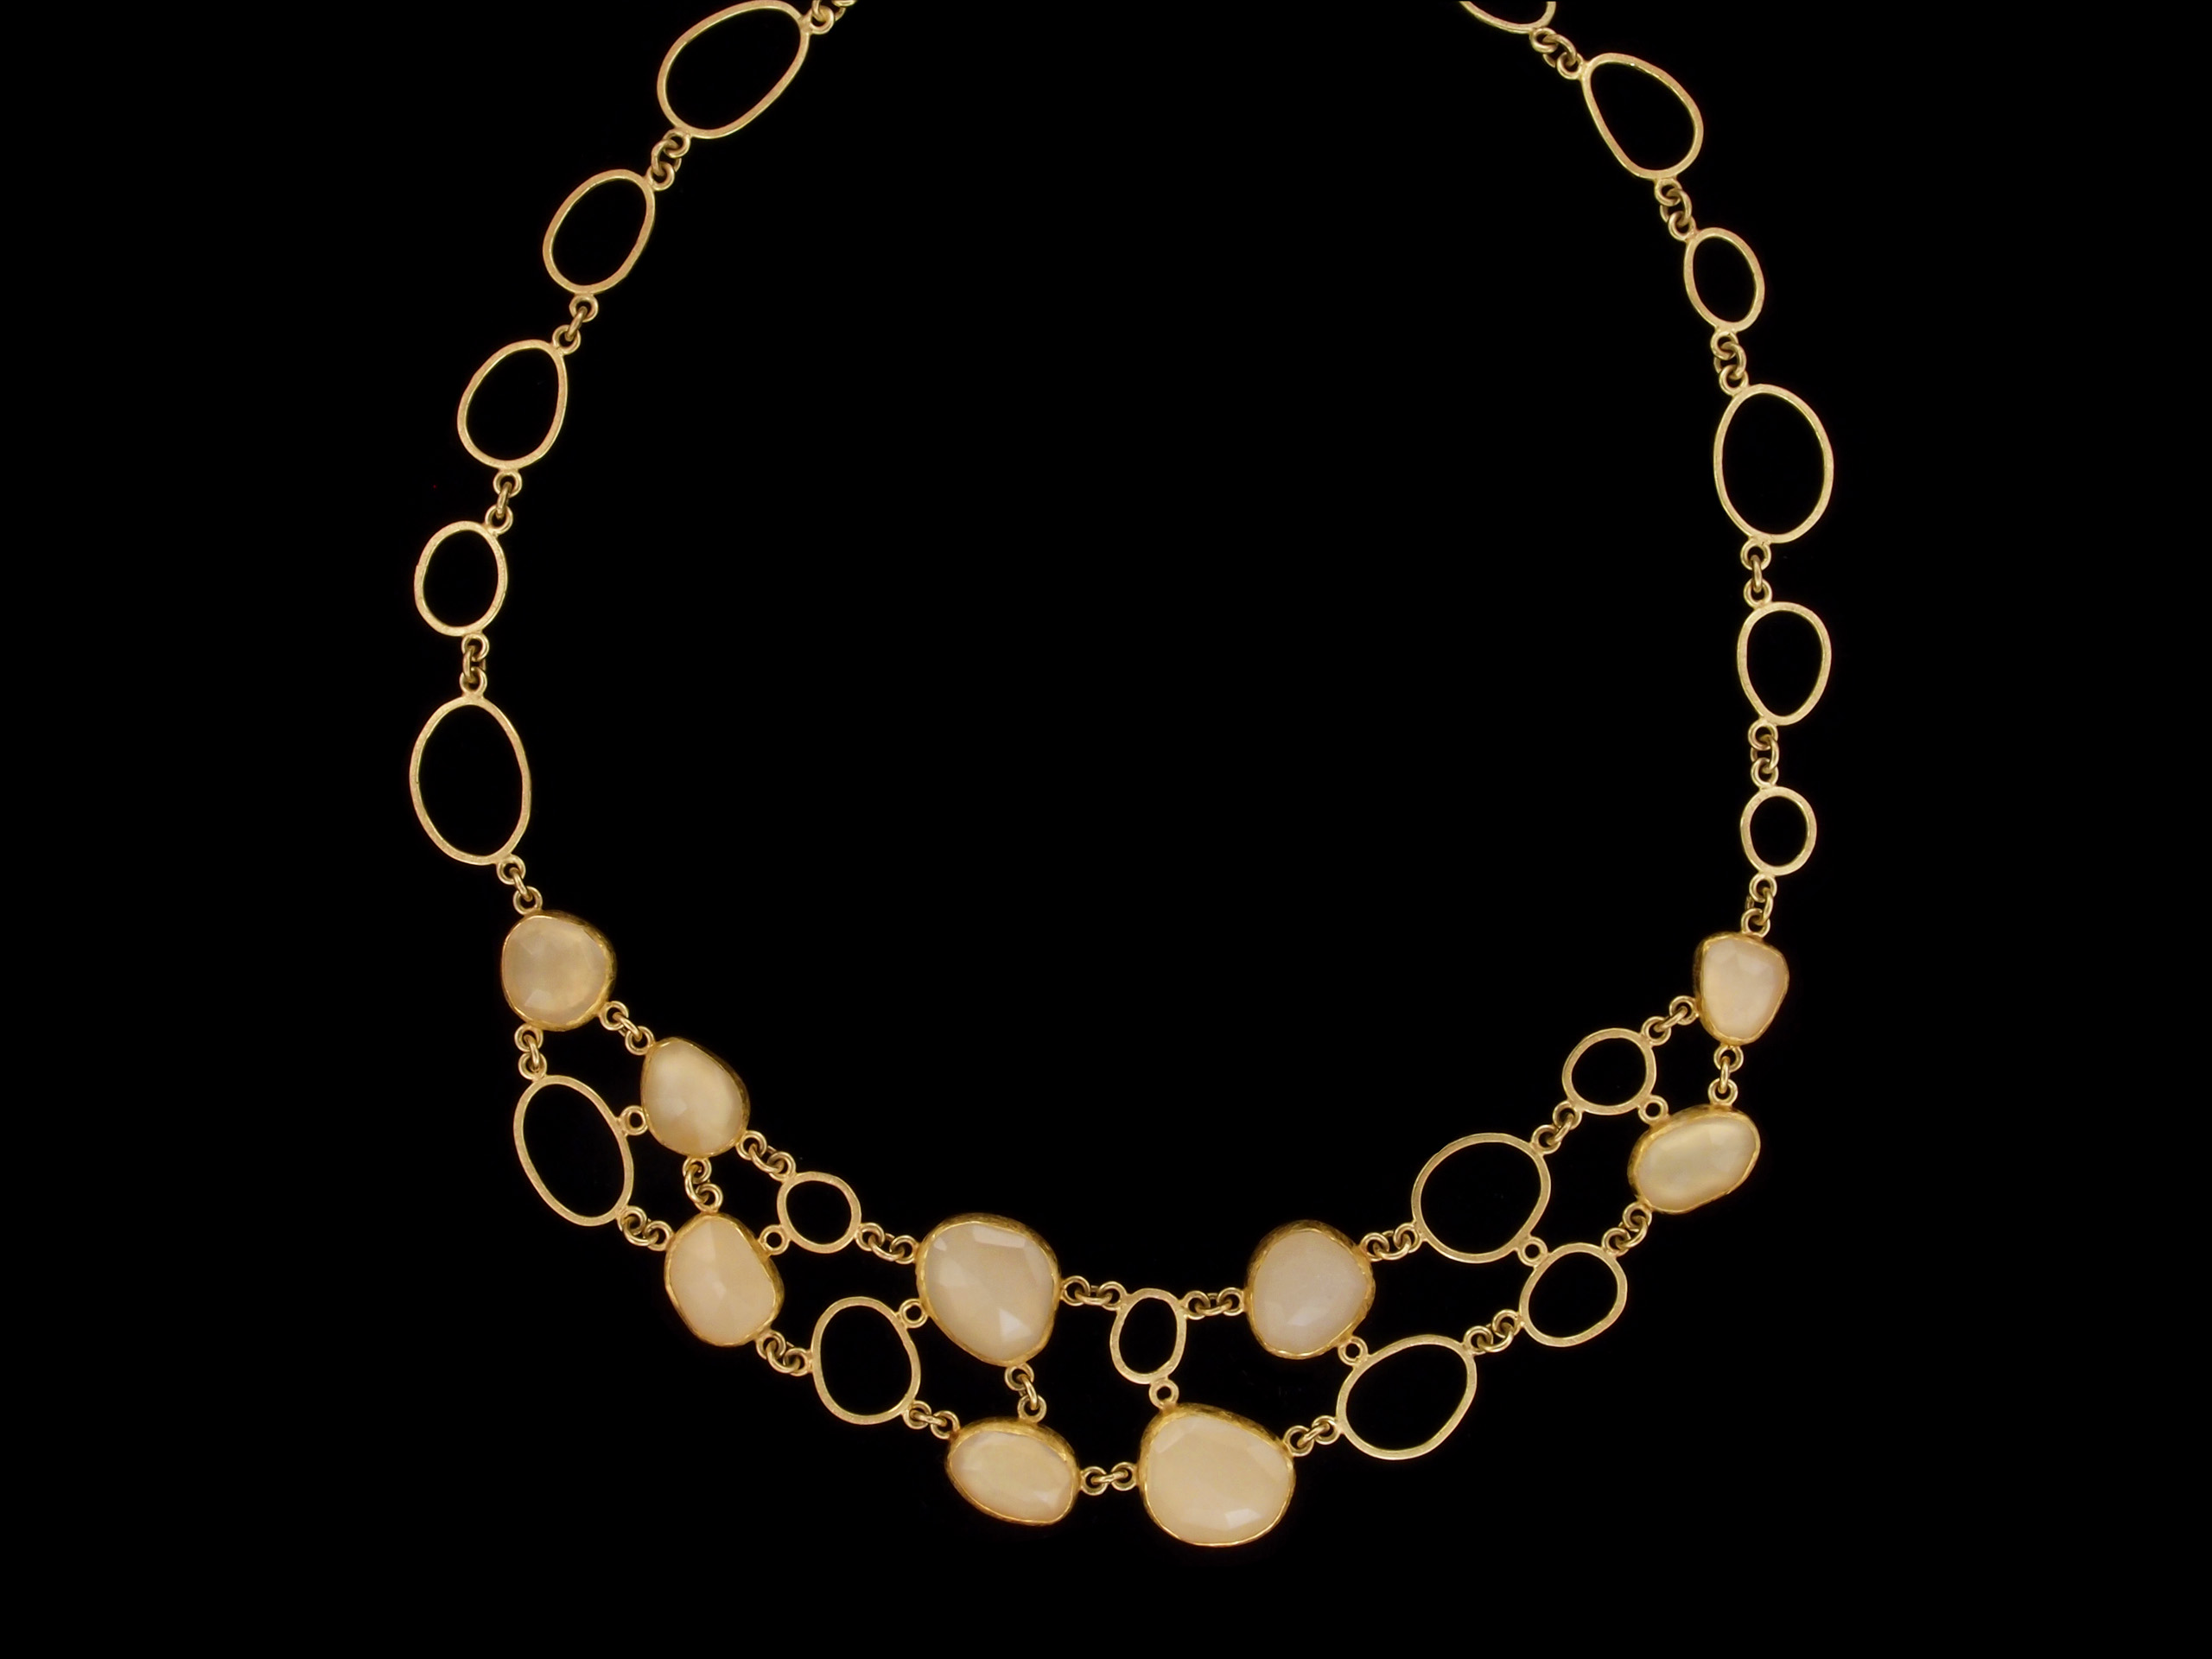 Petra Class, Necklace, 22k and 18k Yellow Gold, Moonstones (33.85cttw ...